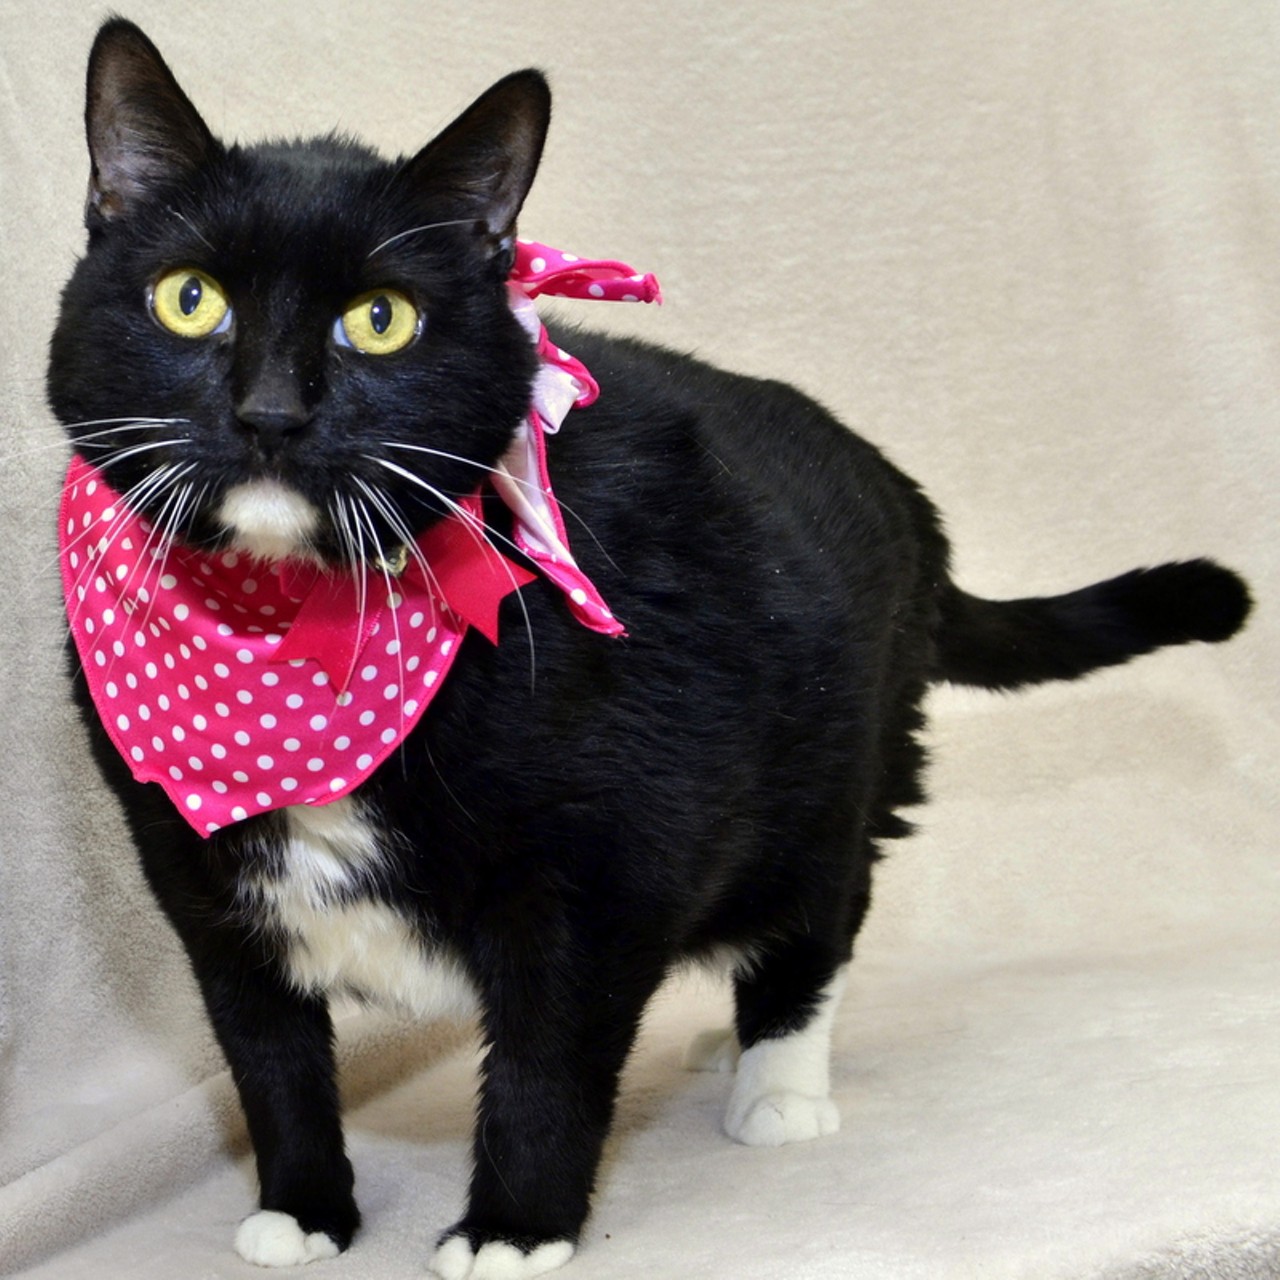 NAME: Minnie Mouse
GENDER: Female
BREED: Domestic short hair
AGE: 8 years, 2 months
WEIGHT: 15.9 pounds
SPECIAL CONSIDERATIONS: None
REASON I CAME TO MHS: Homeless in Dearborn Heights
LOCATION: Berman Center for Animal Care in Westland
ID NUMBER: 859326